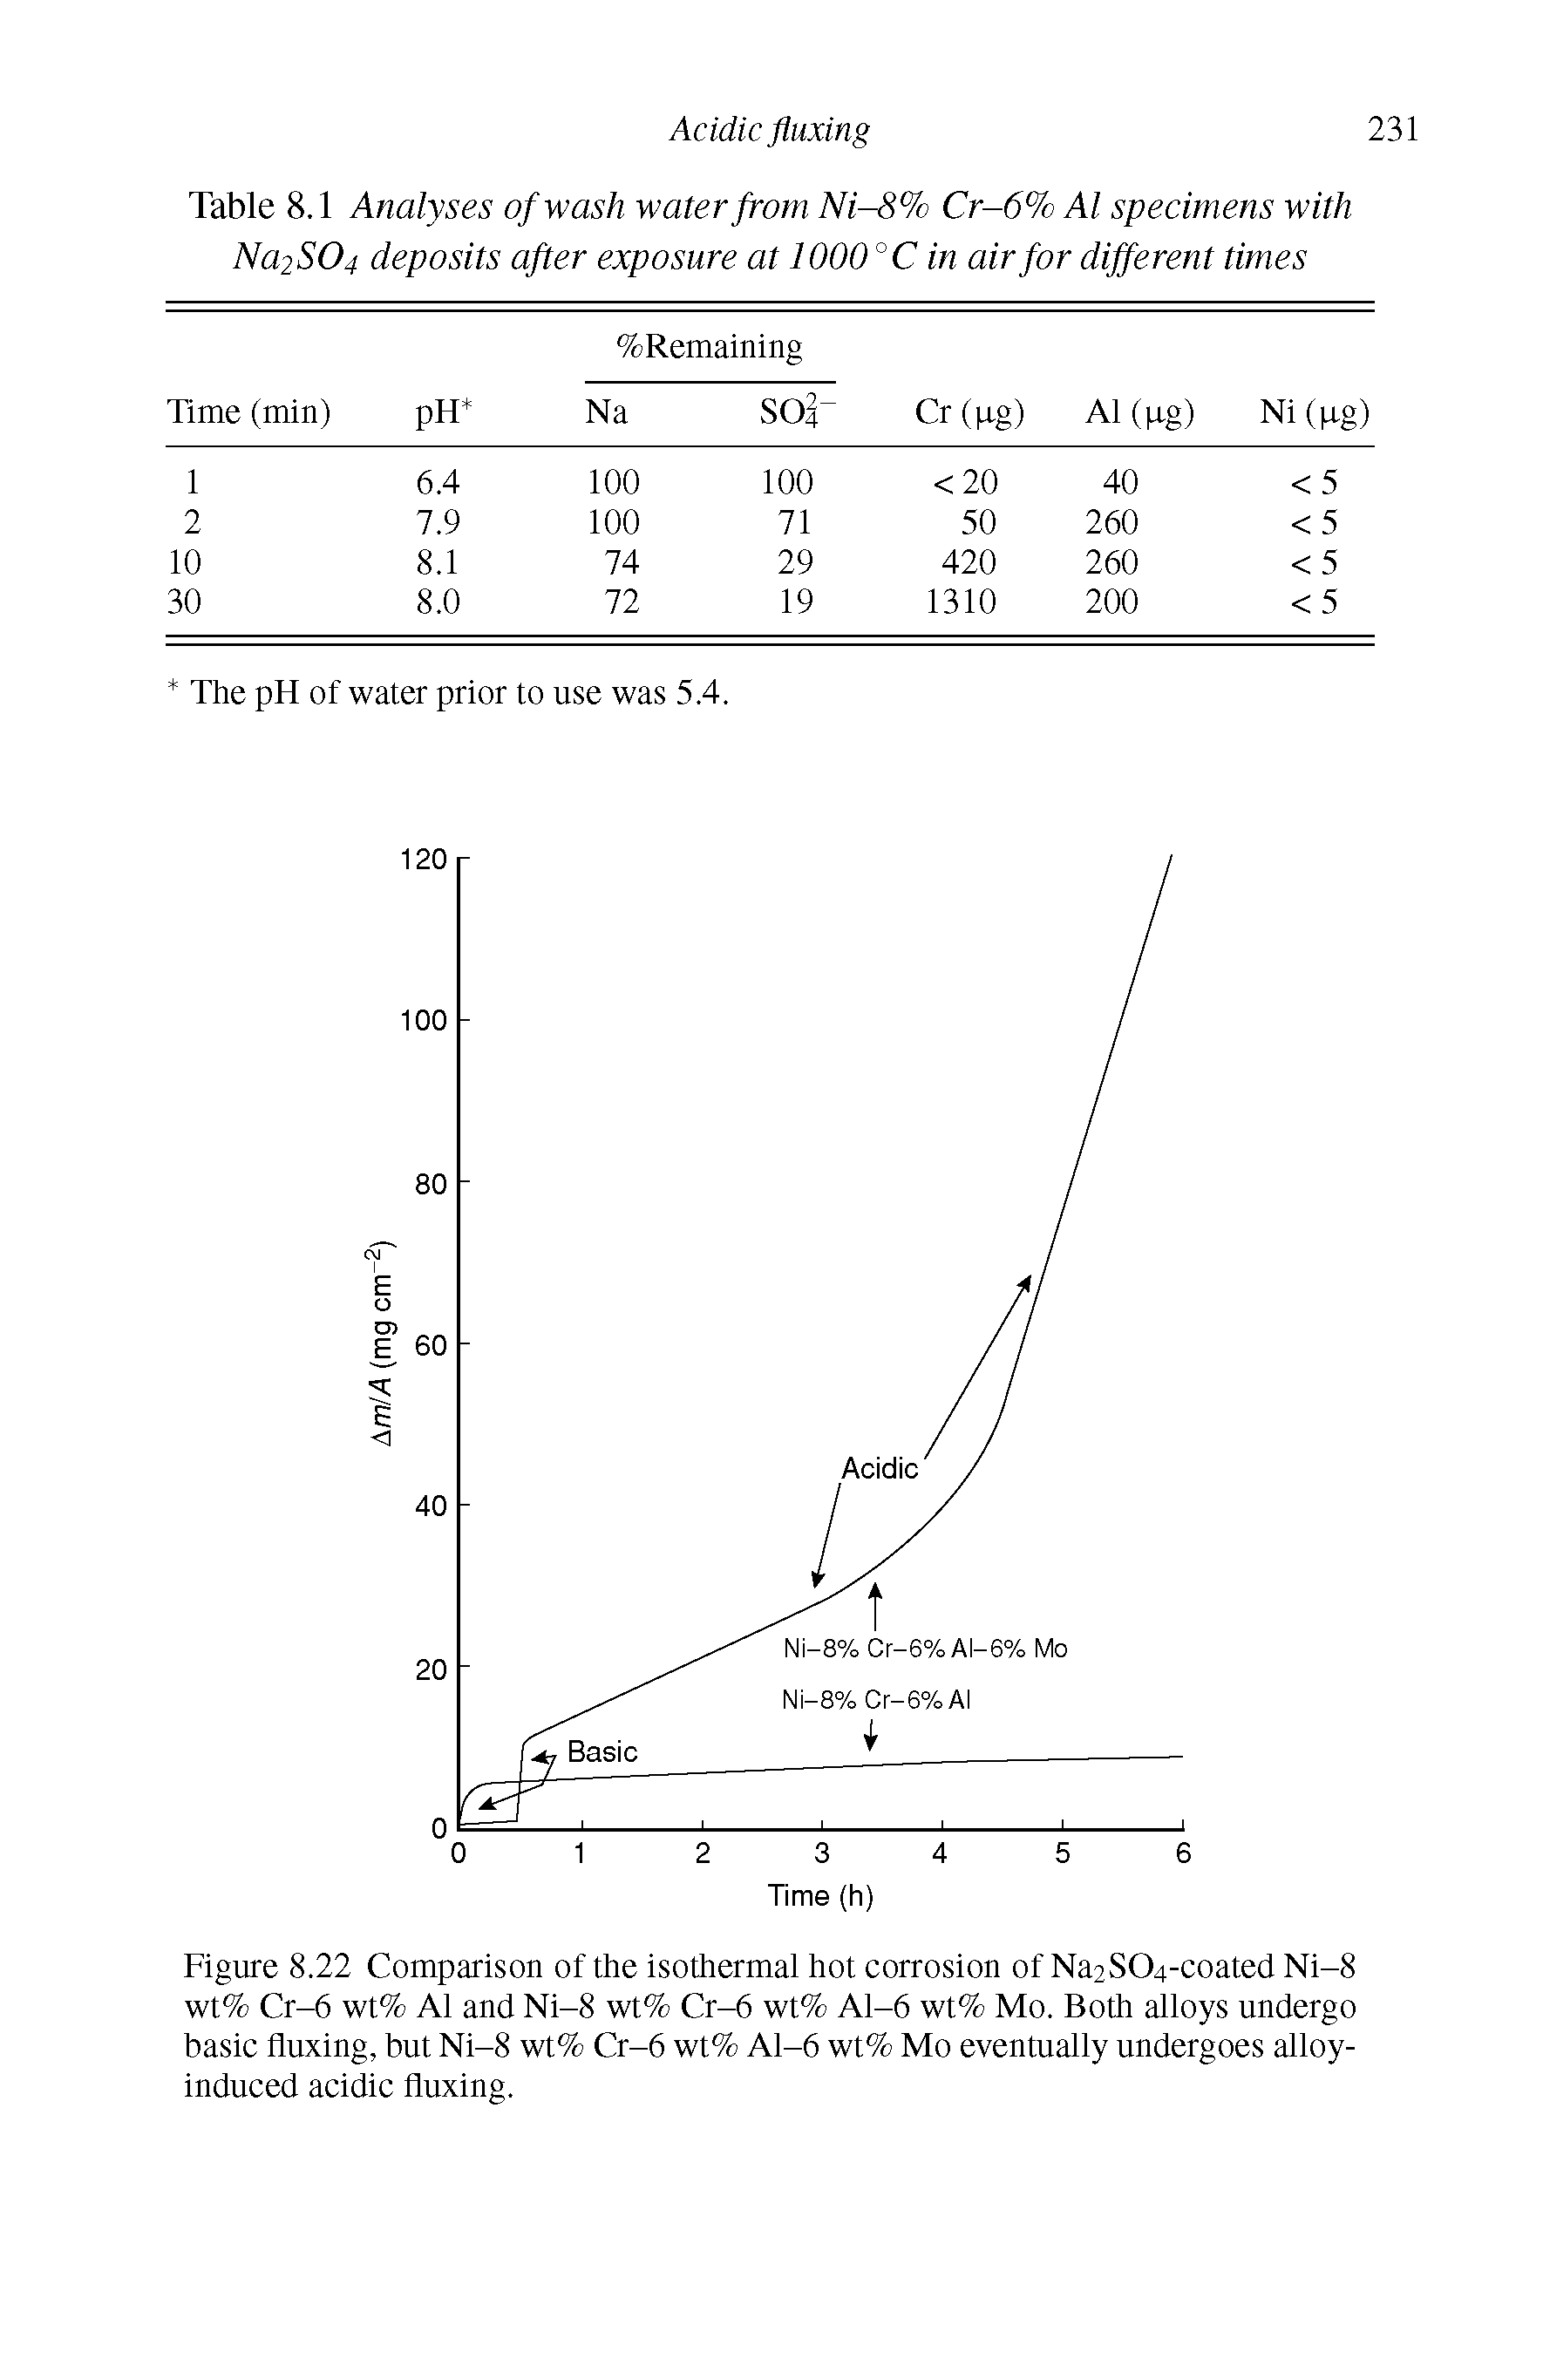 Figure 8.22 Comparison of the isothermal hot corrosion of Na2S04-coated Ni-8 wt% Cr-6 wt% Al and Ni-8 wt% Cr-6 wt% Al-6 wt% Mo. Both alloys undergo basic fluxing, but Ni-8 wt% Cr-6 wt% Al-6 wt% Mo eventually undergoes alloy-induced acidic fluxing.